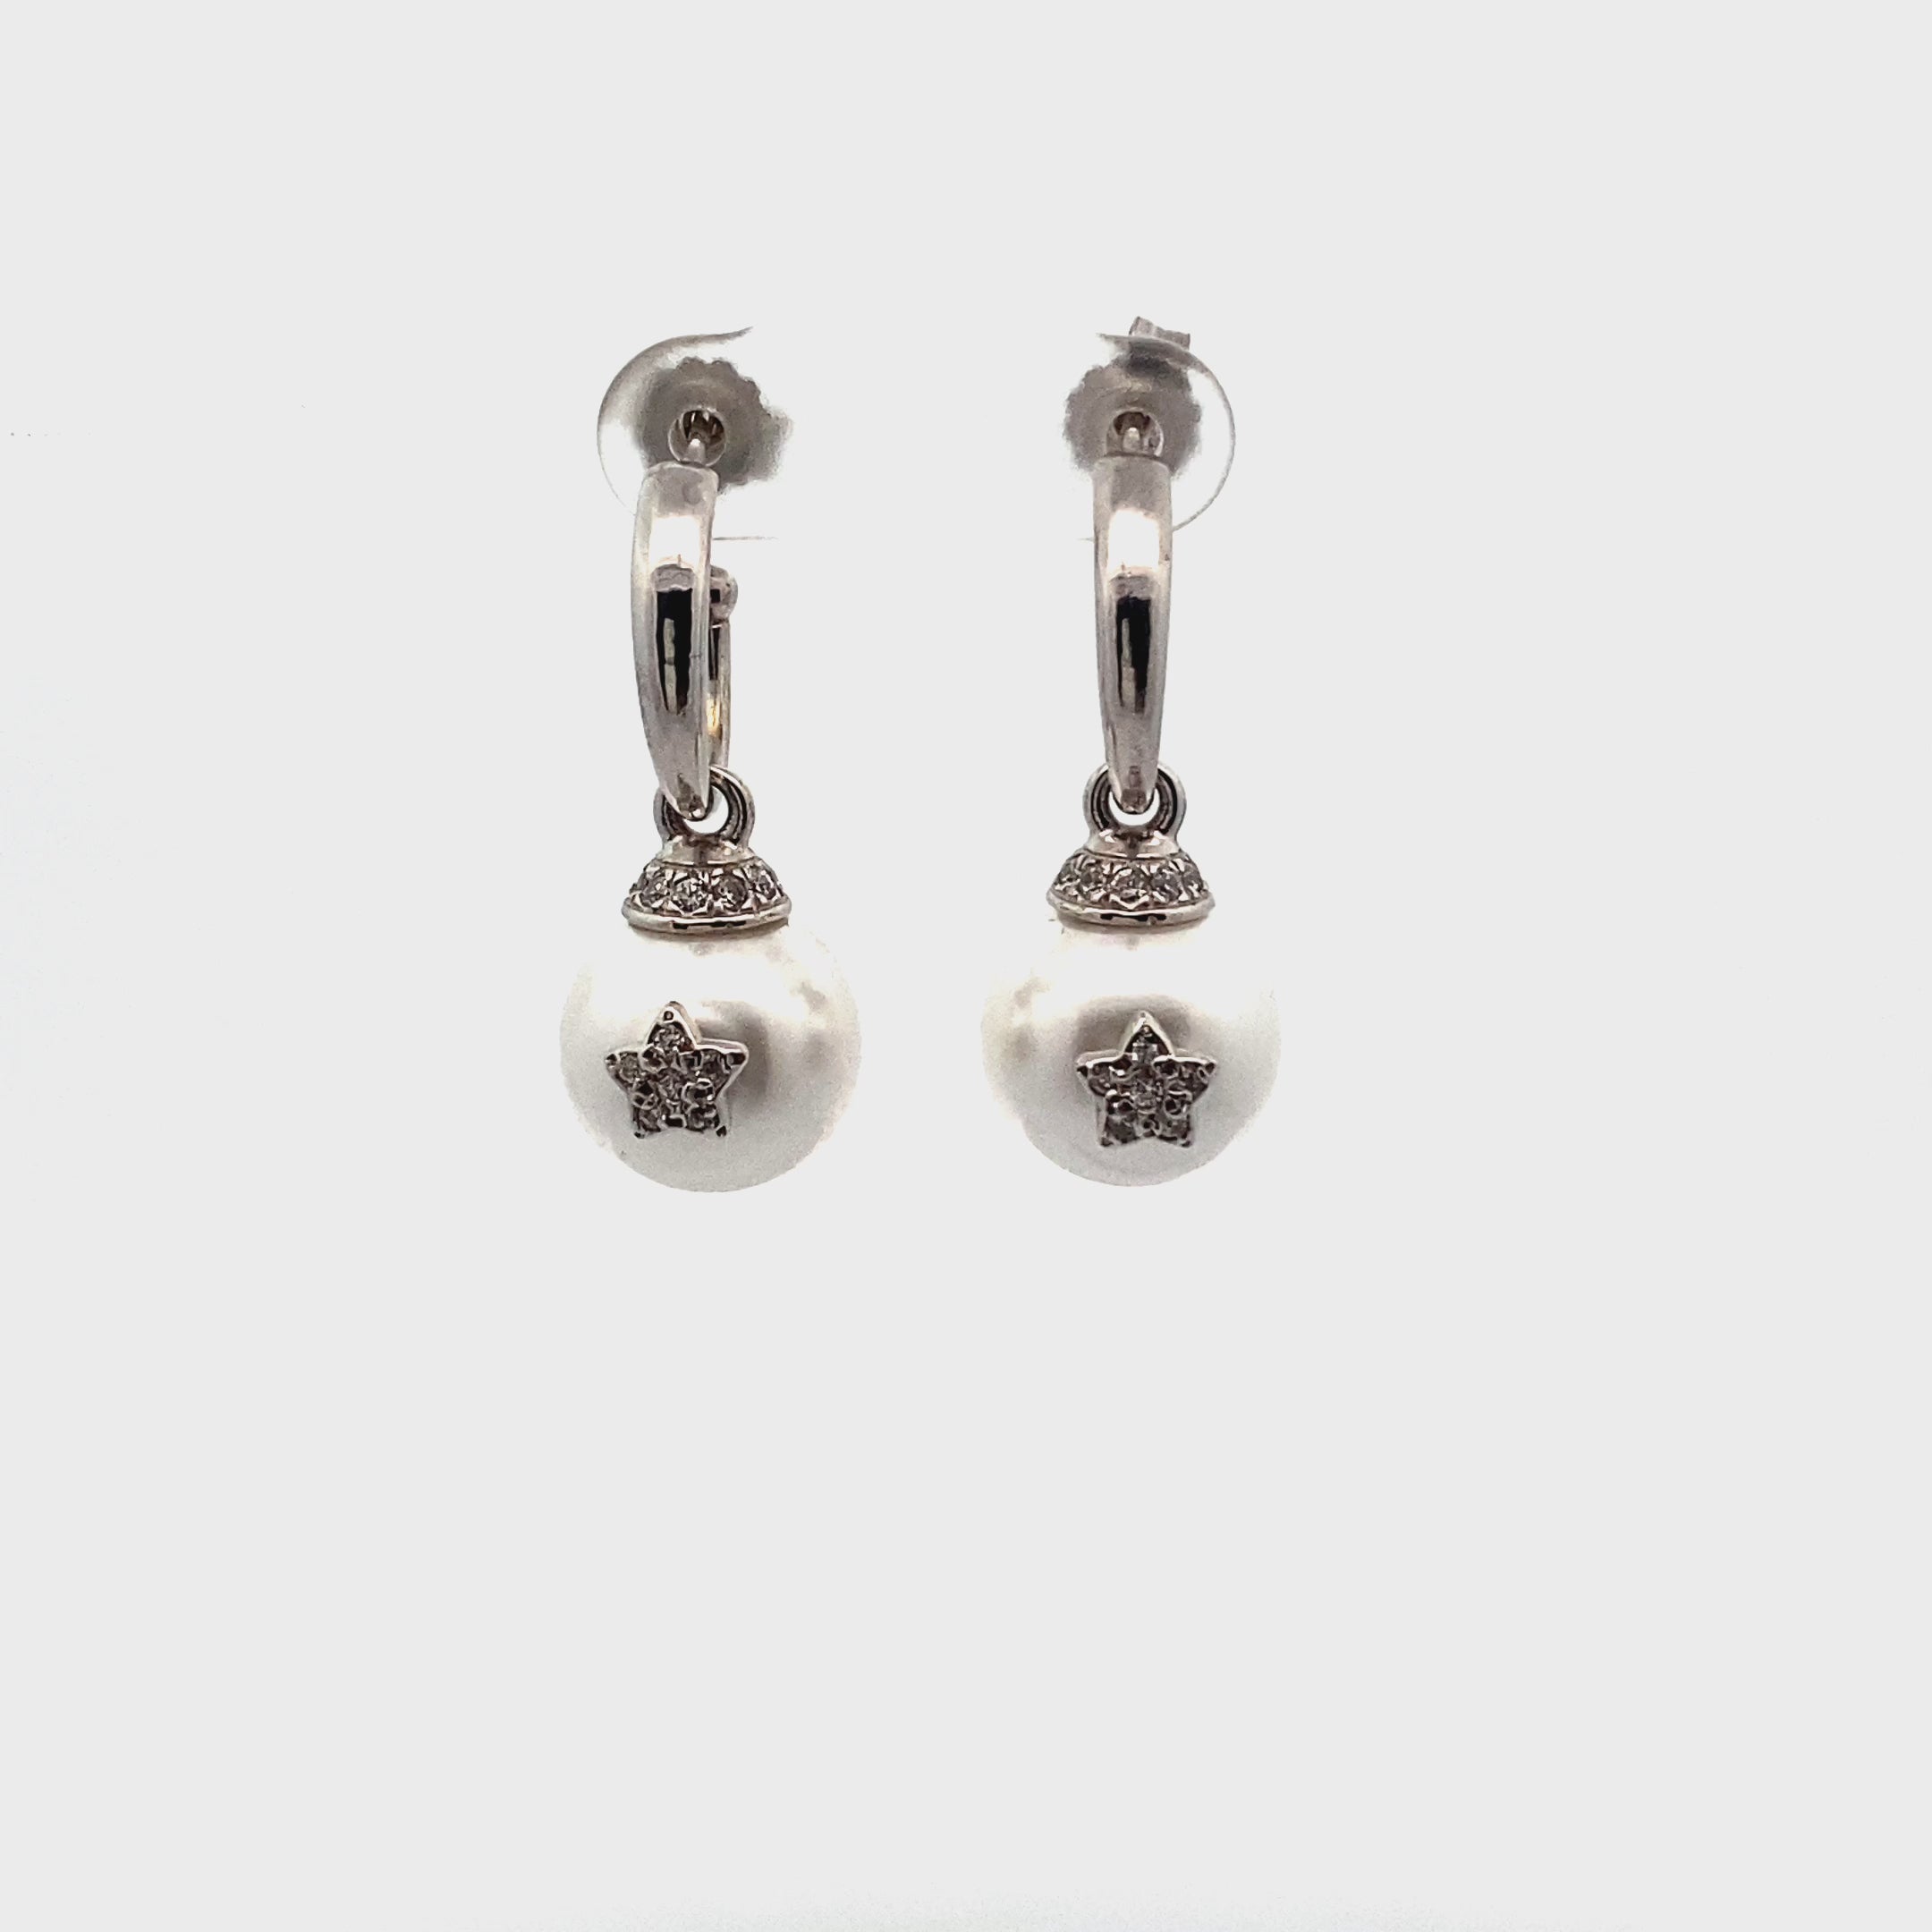 Earrings - PENDANT EARRINGS PEARLS AND STARS - GALACTICA ICE - thumbnail - video - 1 | Rue des Mille